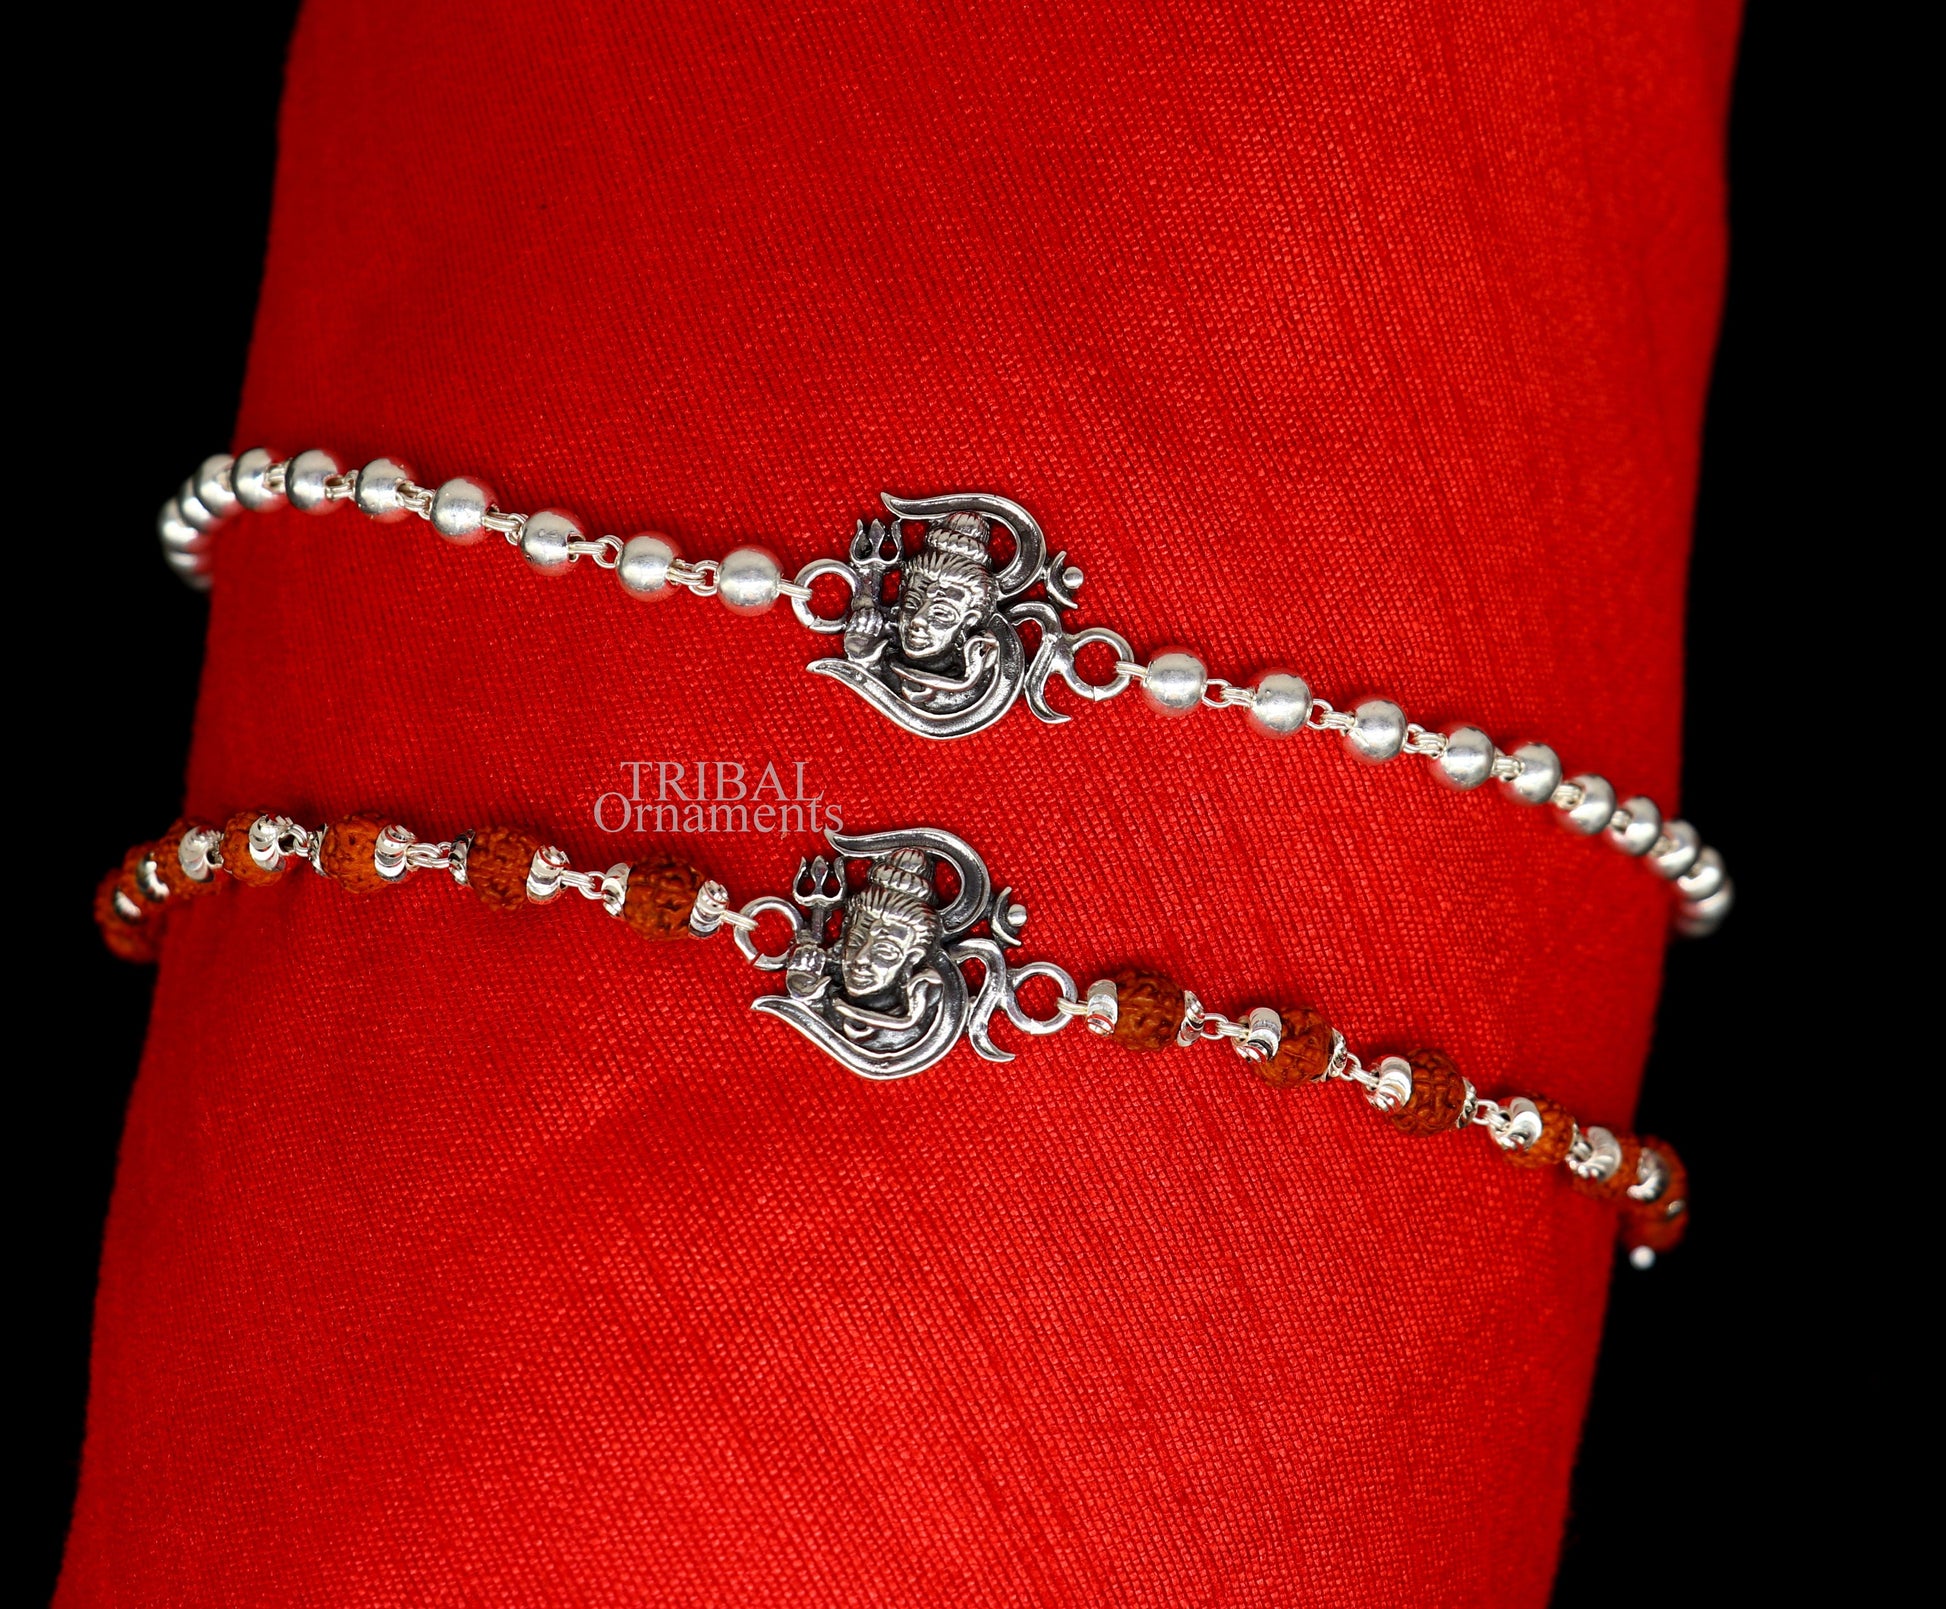 Lord Shiva Rakhi 925 Sterling silver Rakhi bracelet Rrudrakha and silver beads best gift for your brother's for special gifting rk199 - TRIBAL ORNAMENTS